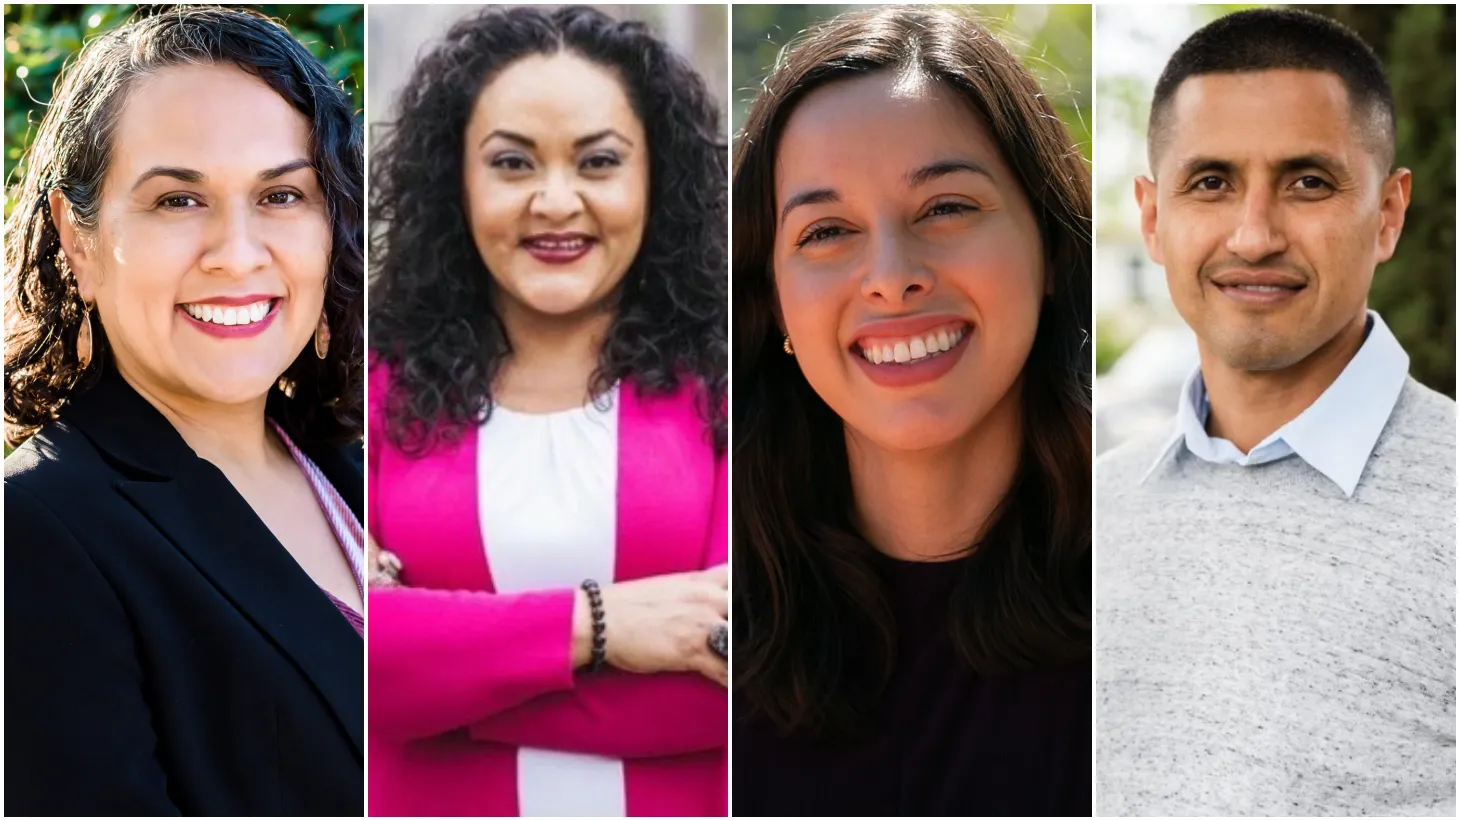 L to R: Maria Brenes, Rocio Rivas, Kelly Gonez, and Marvin Rodriguez are running for a seat on the LAUSD school board.